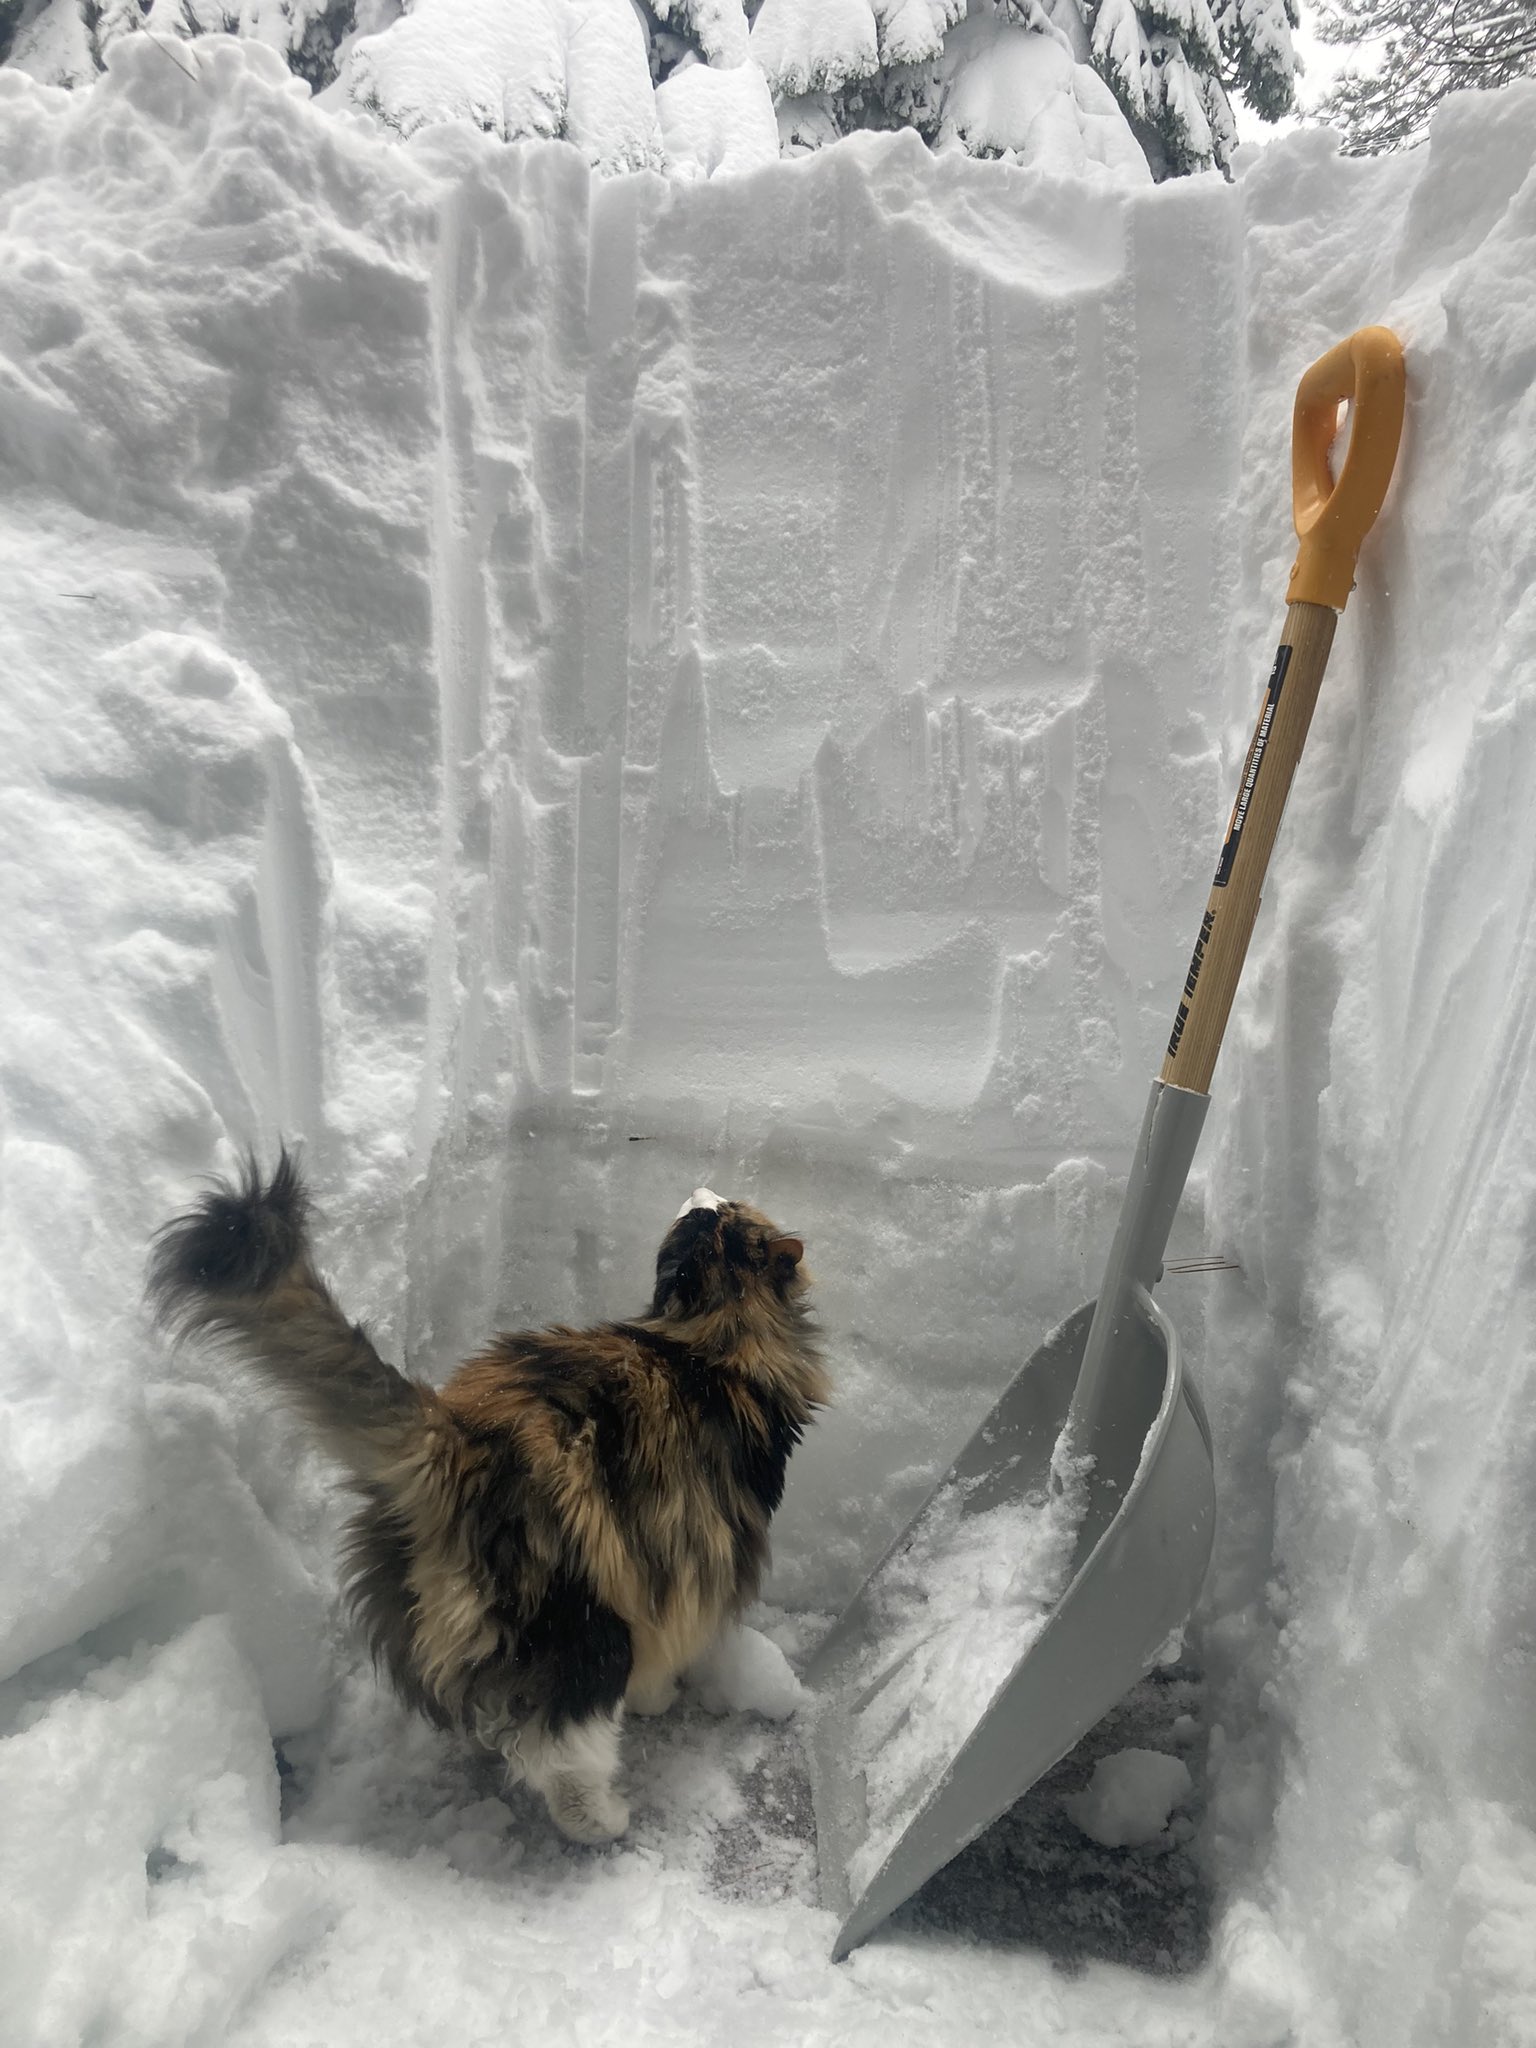 A cat next to a shovel looking up at a pile of snow